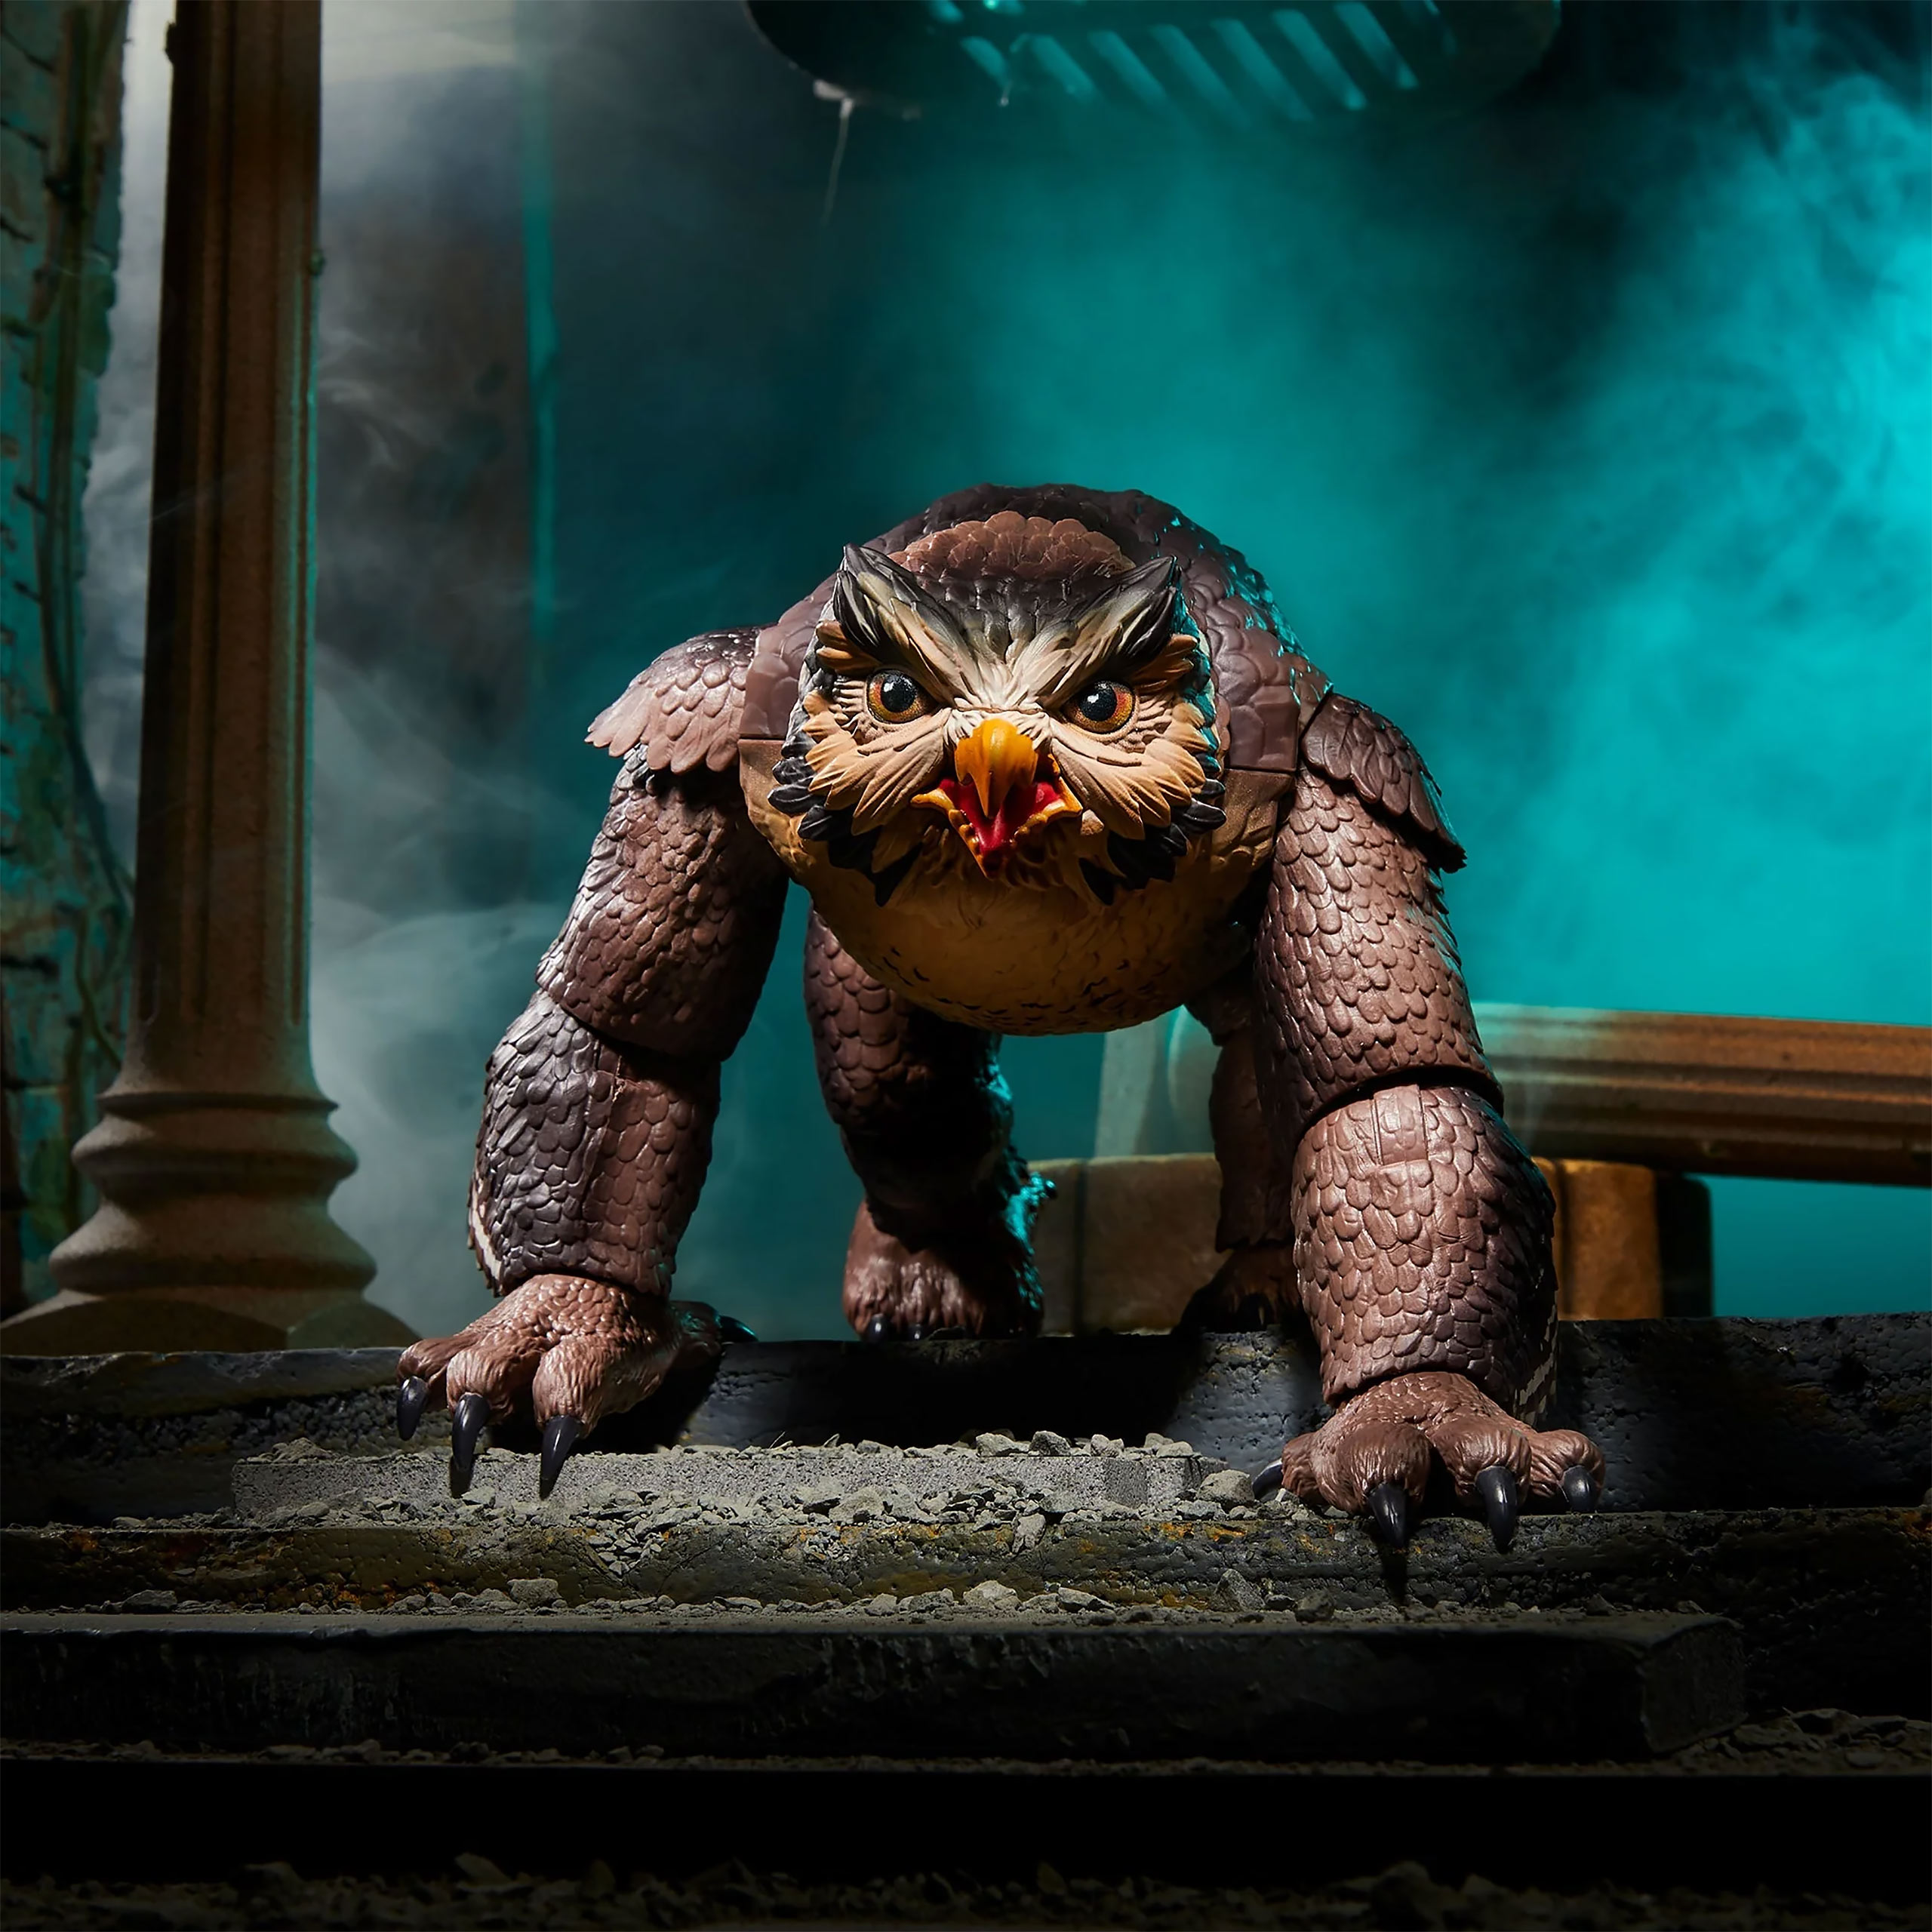 Dungeons & Dragons - Owlbear Action Figure